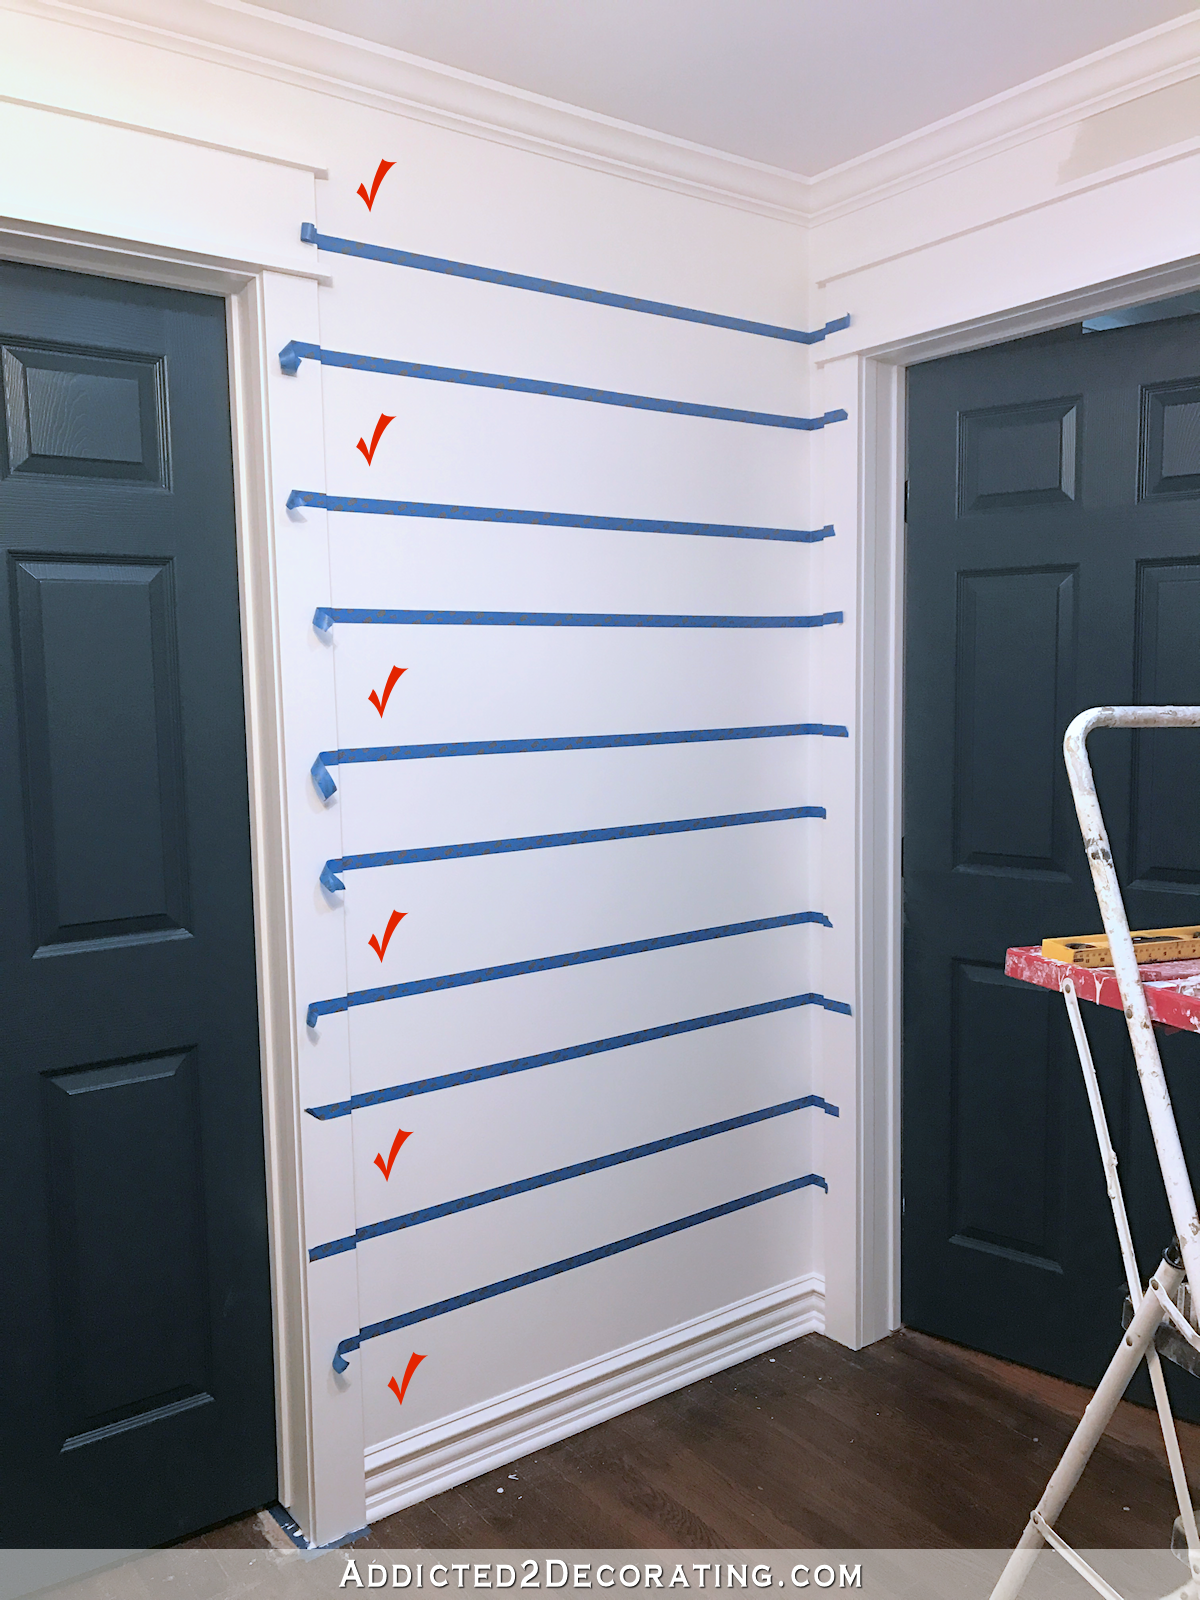 How to paint perfect stripes on a wall - 5 - use painters tape for delicate surfaces to tape off lines